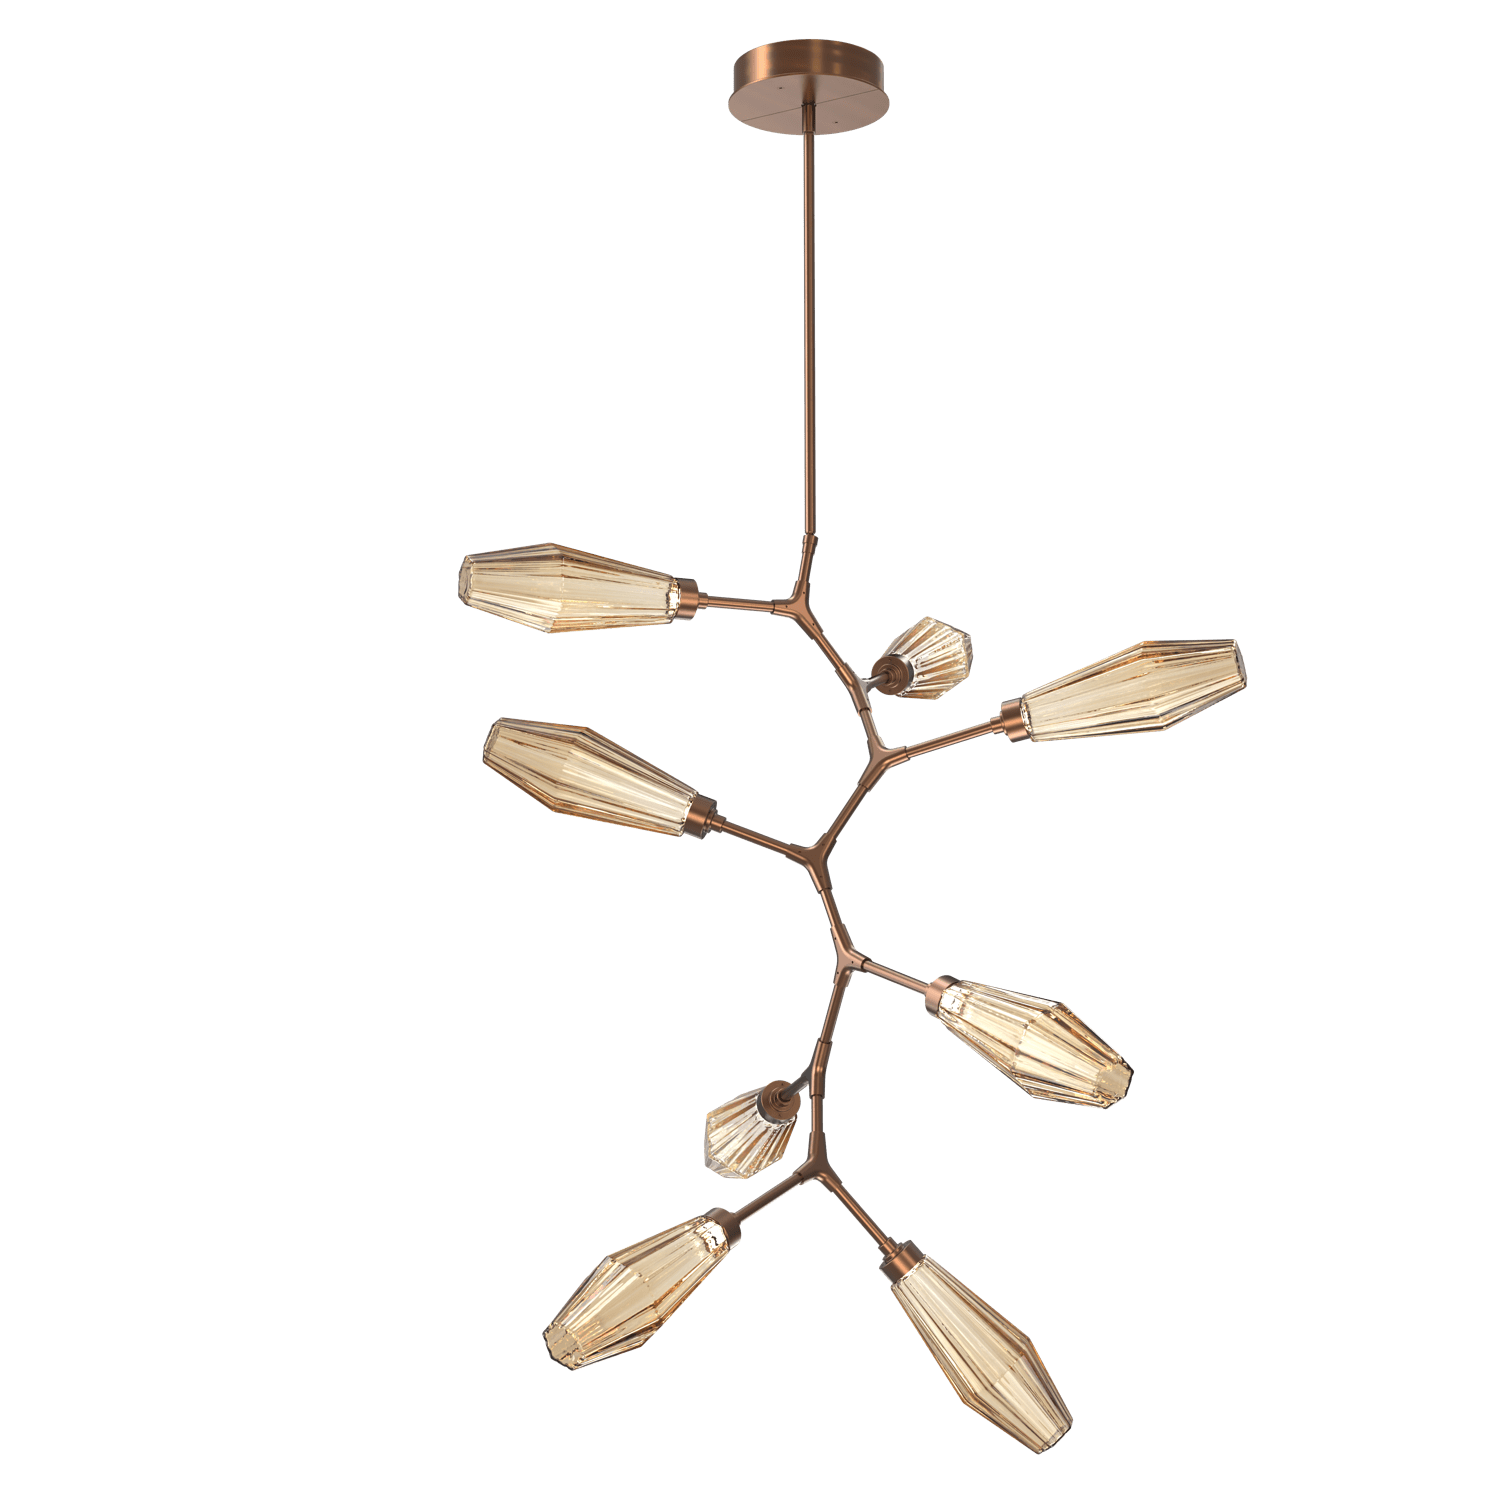 CHB0049-VB-RB-RB-Hammerton-Studio-Aalto-8-light-modern-vine-chandelier-with-oil-rubbed-bronze-finish-and-optic-ribbed-bronze-glass-shades-and-LED-lamping